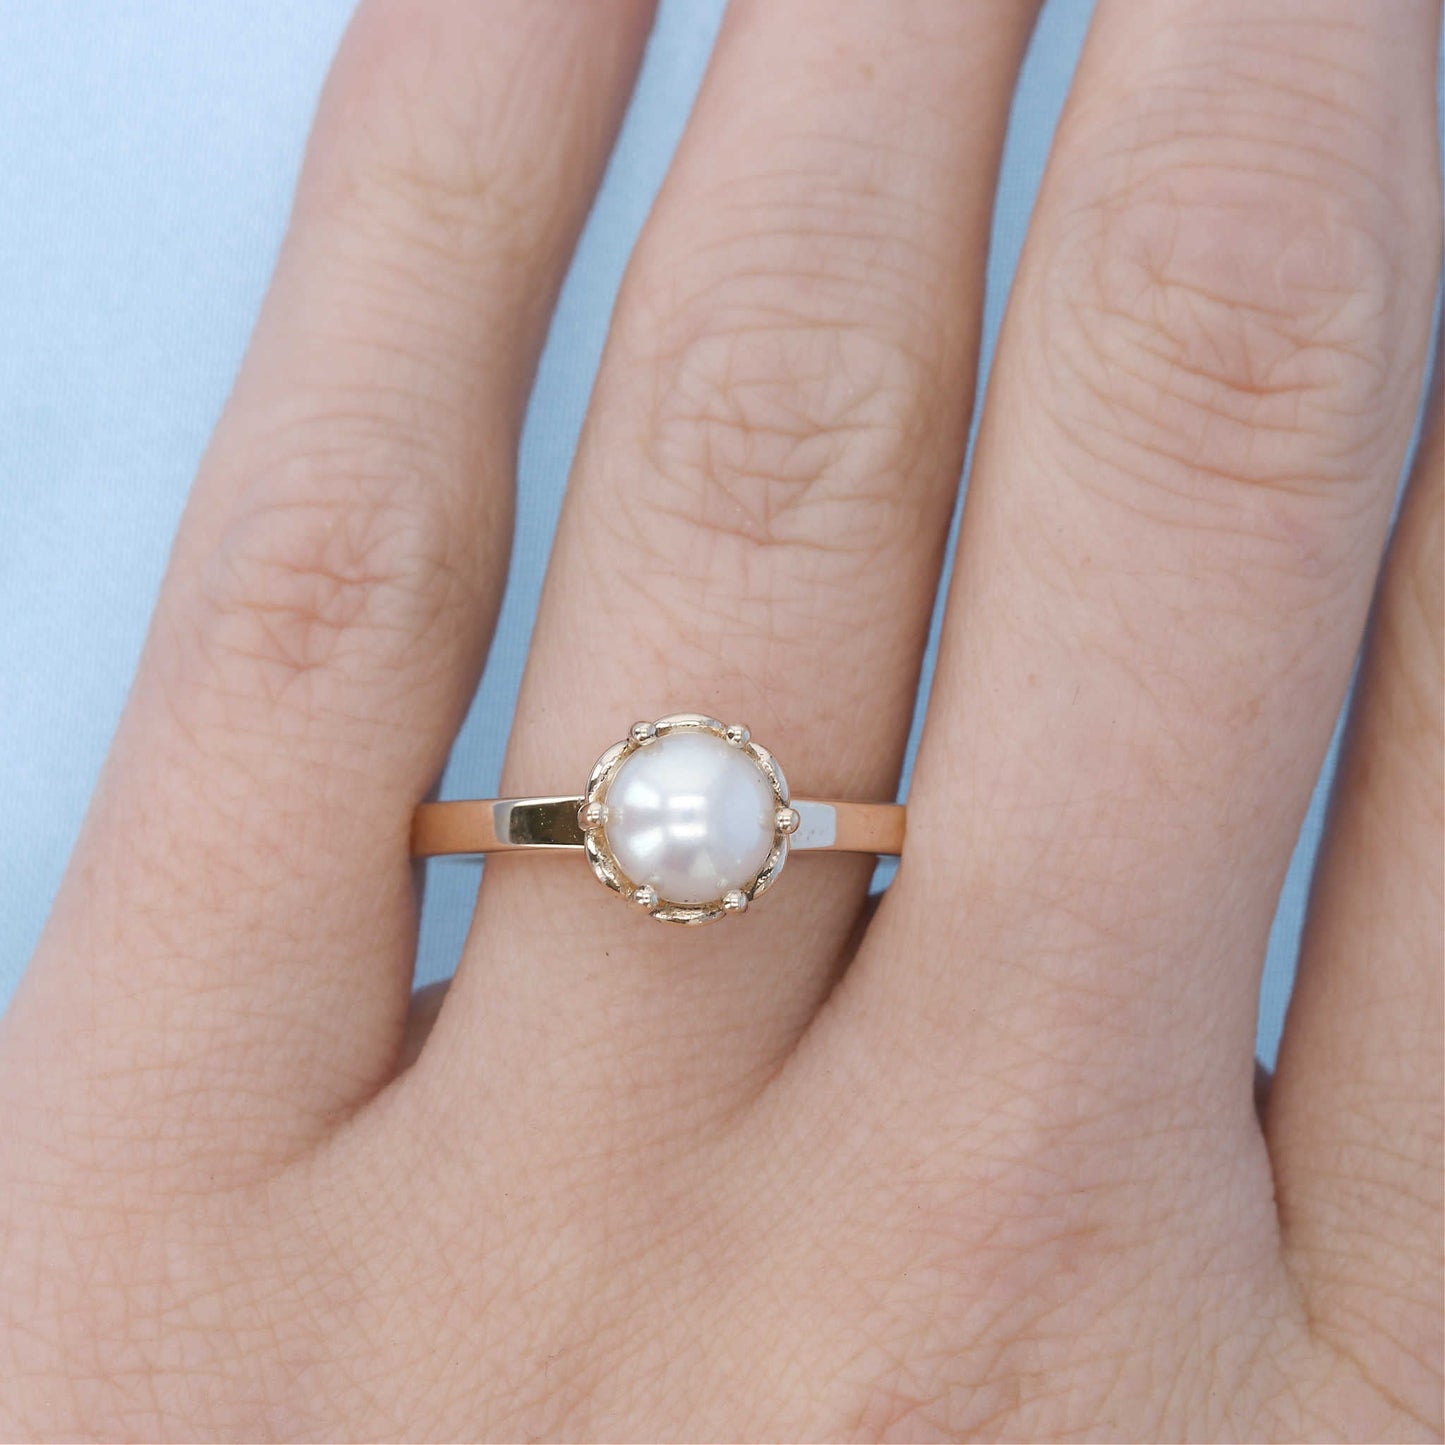 Pearl Solitaire Ring on a Finger